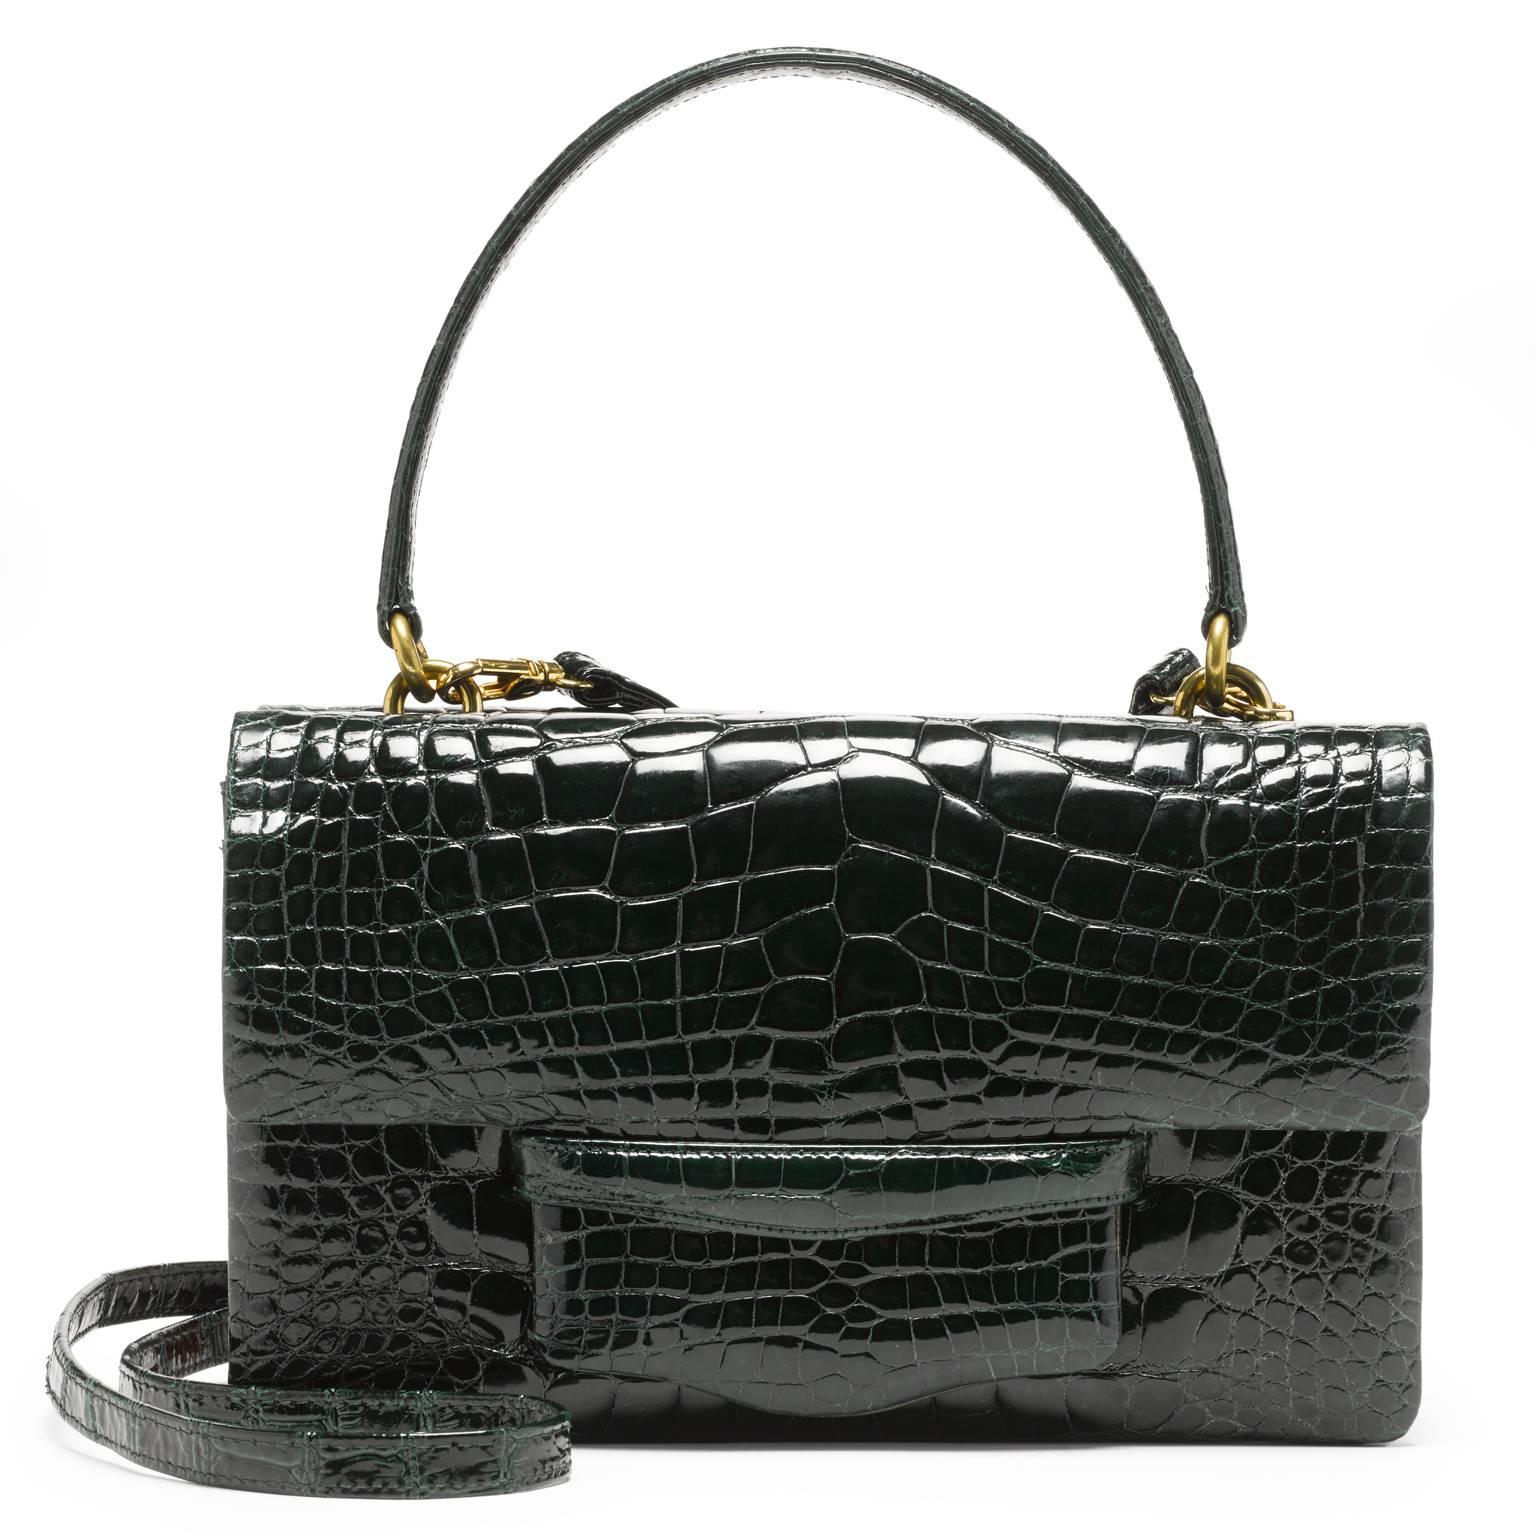 This double gusseted alligator bag is fully lined in leather. A stitched doubled sided handle is joined to the bag with interlocking gold rings. There is an additional 52” detachable shoulder strap.  

- one exterior pocket in center of the bag 